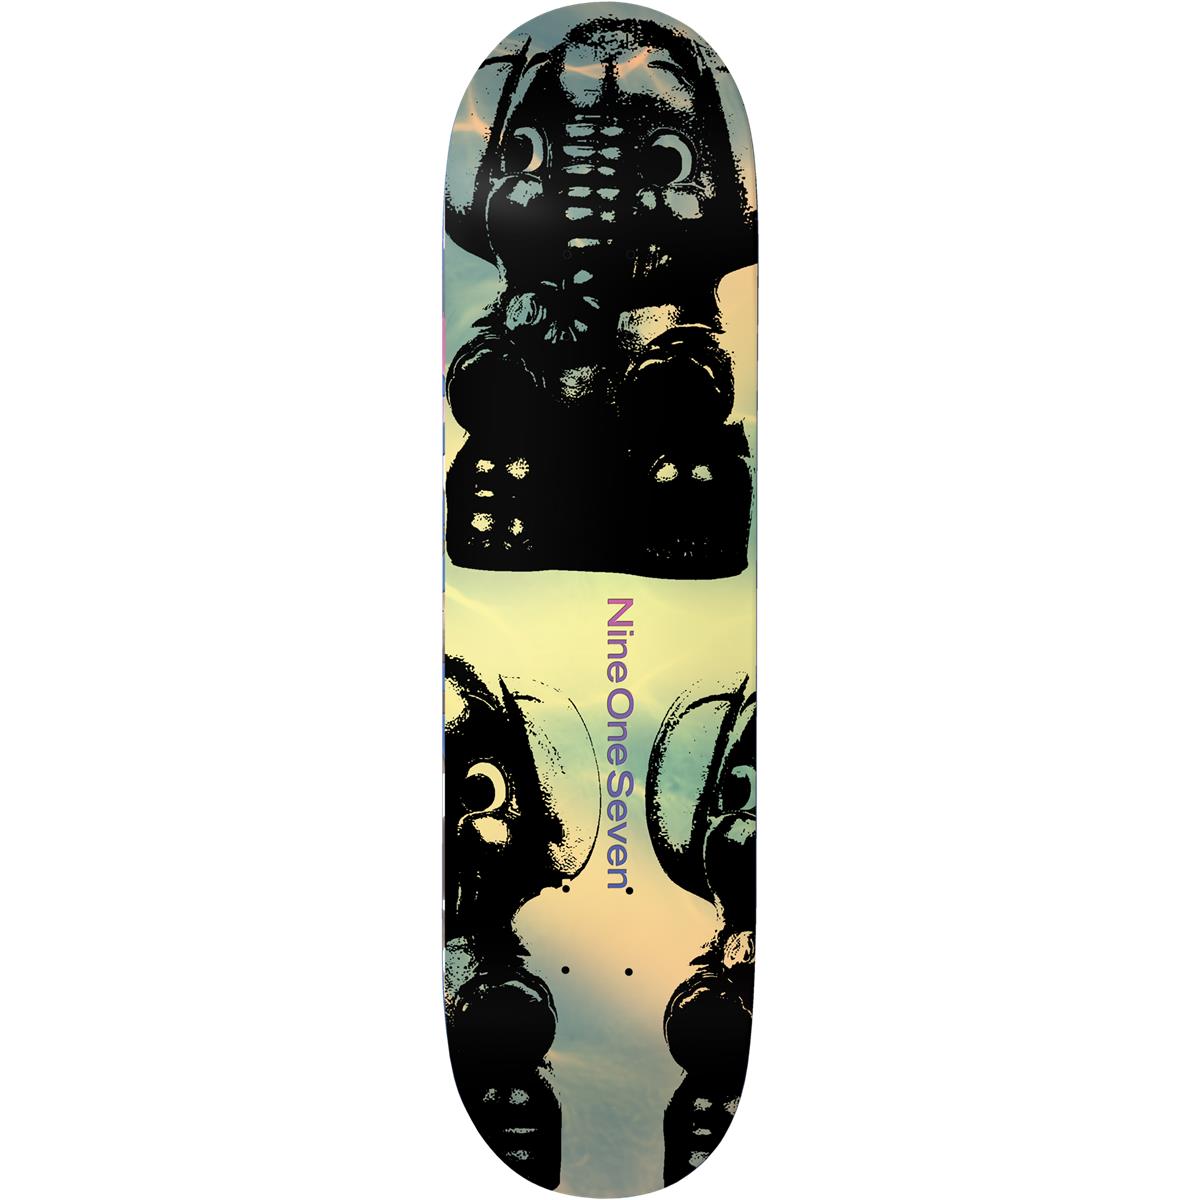 Call Me 917 Toy 2 Deck